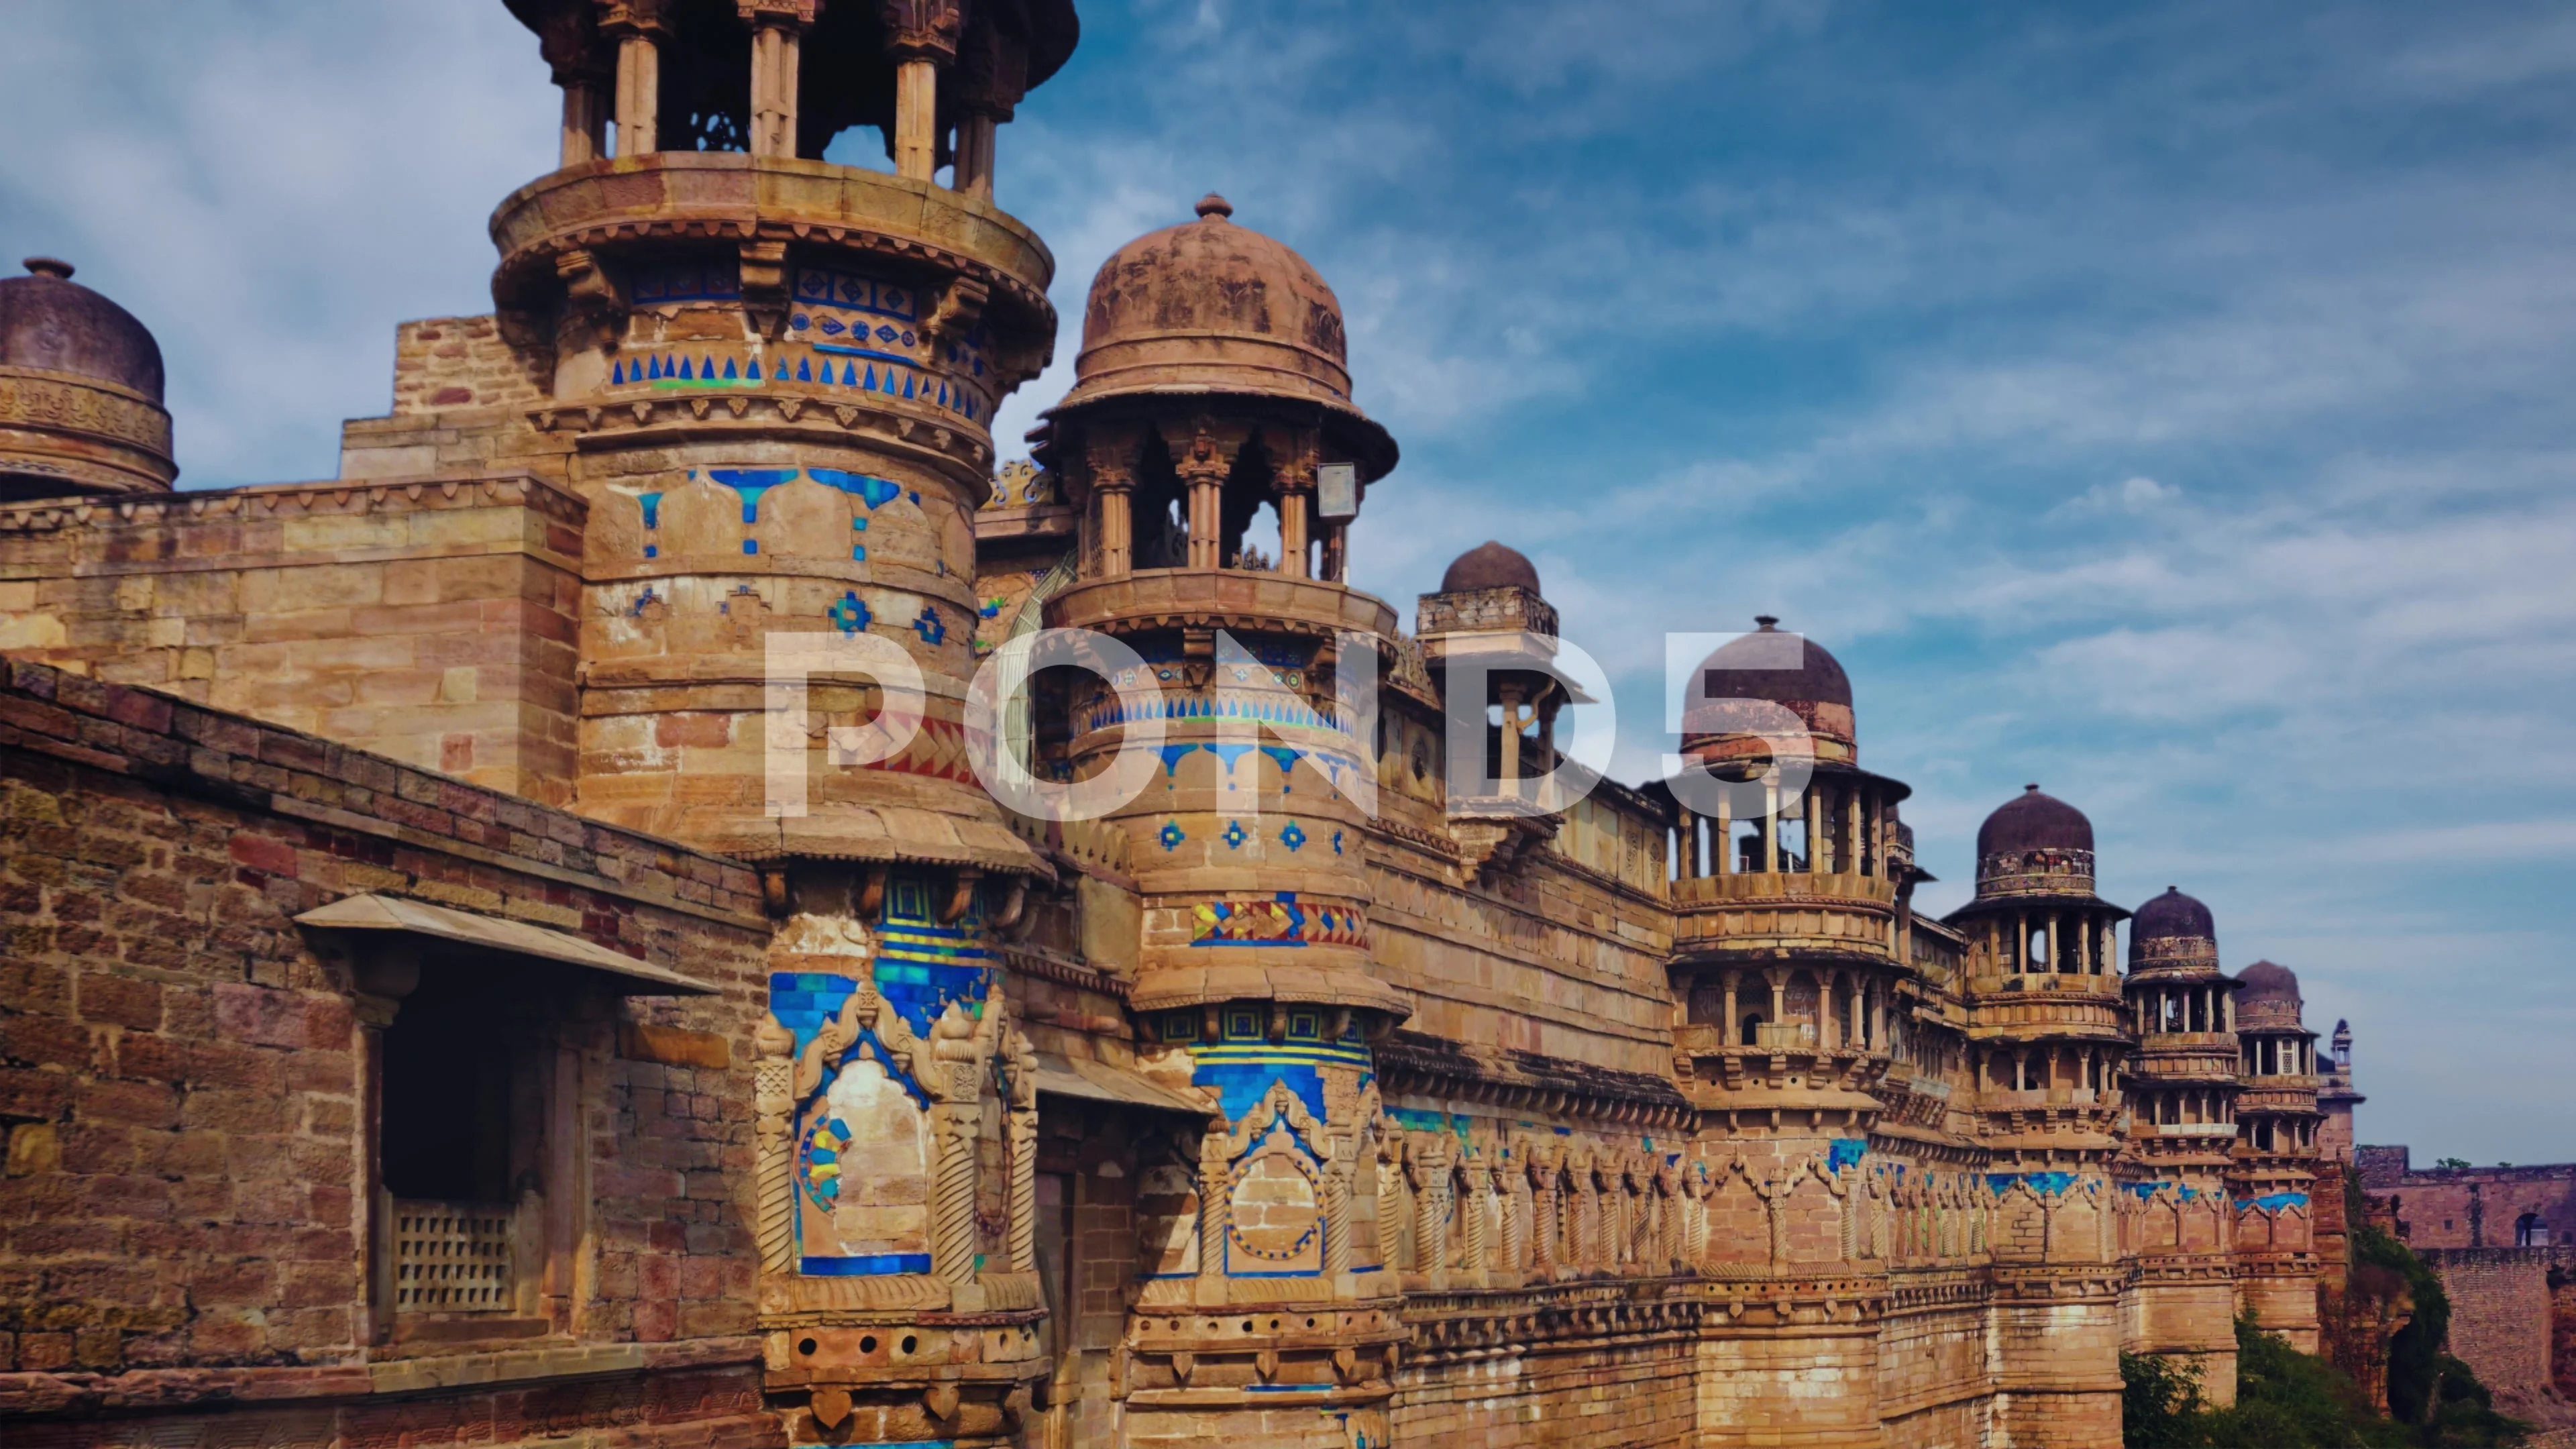 Gwalior Fort | Holamon.cat ➡️ The alternative travel guide around the world